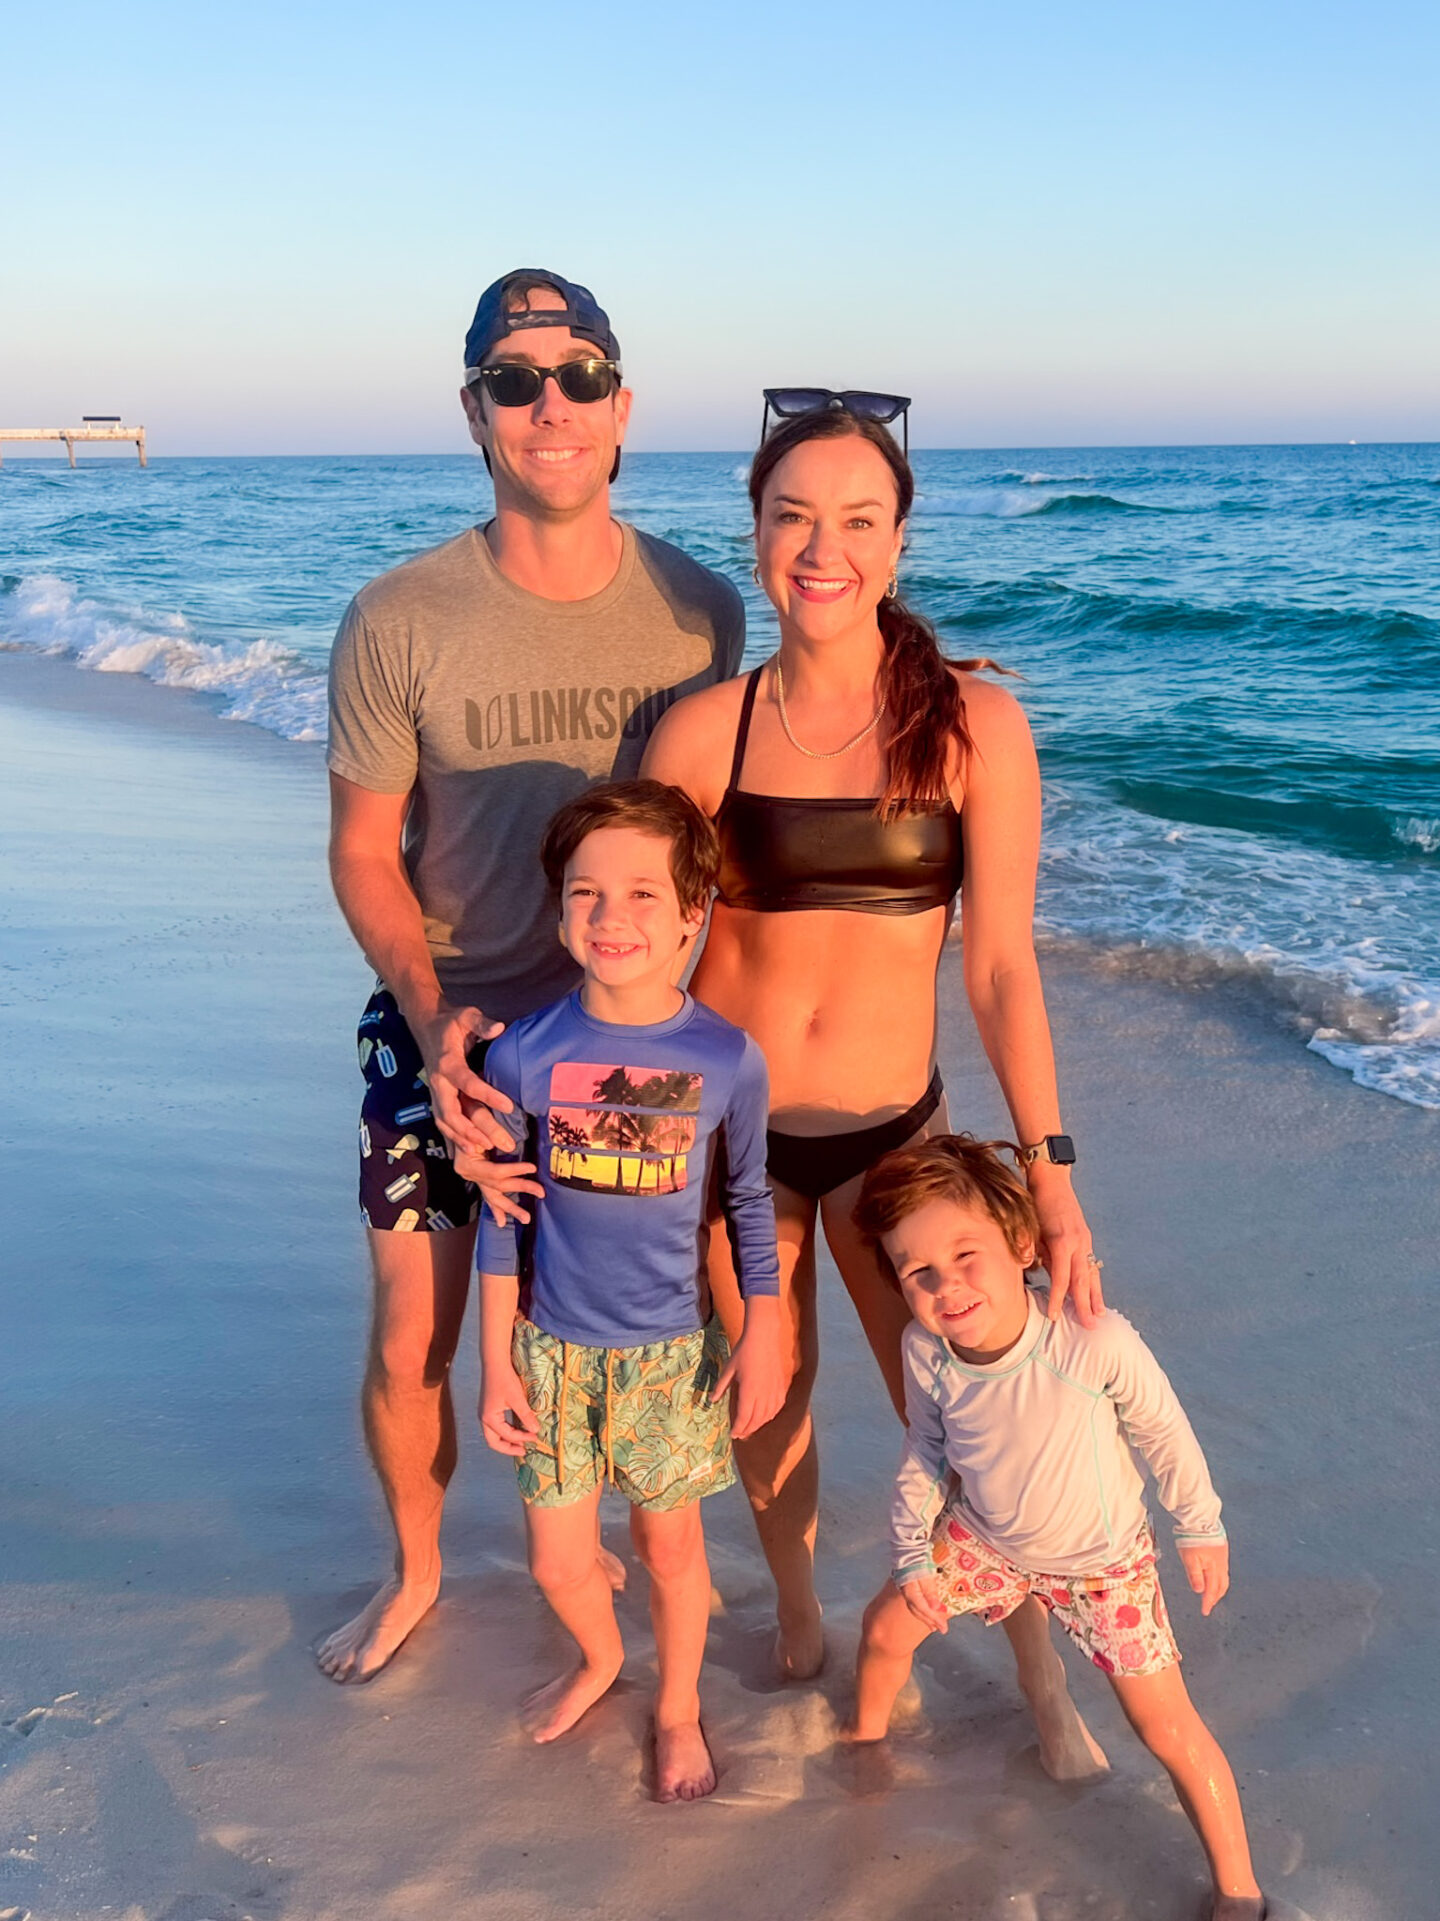 Christian Birmingham podcaster & health coach, Heather Brown, shares how to Family Reset with a vacation guide to Gulf Shores Alabama.